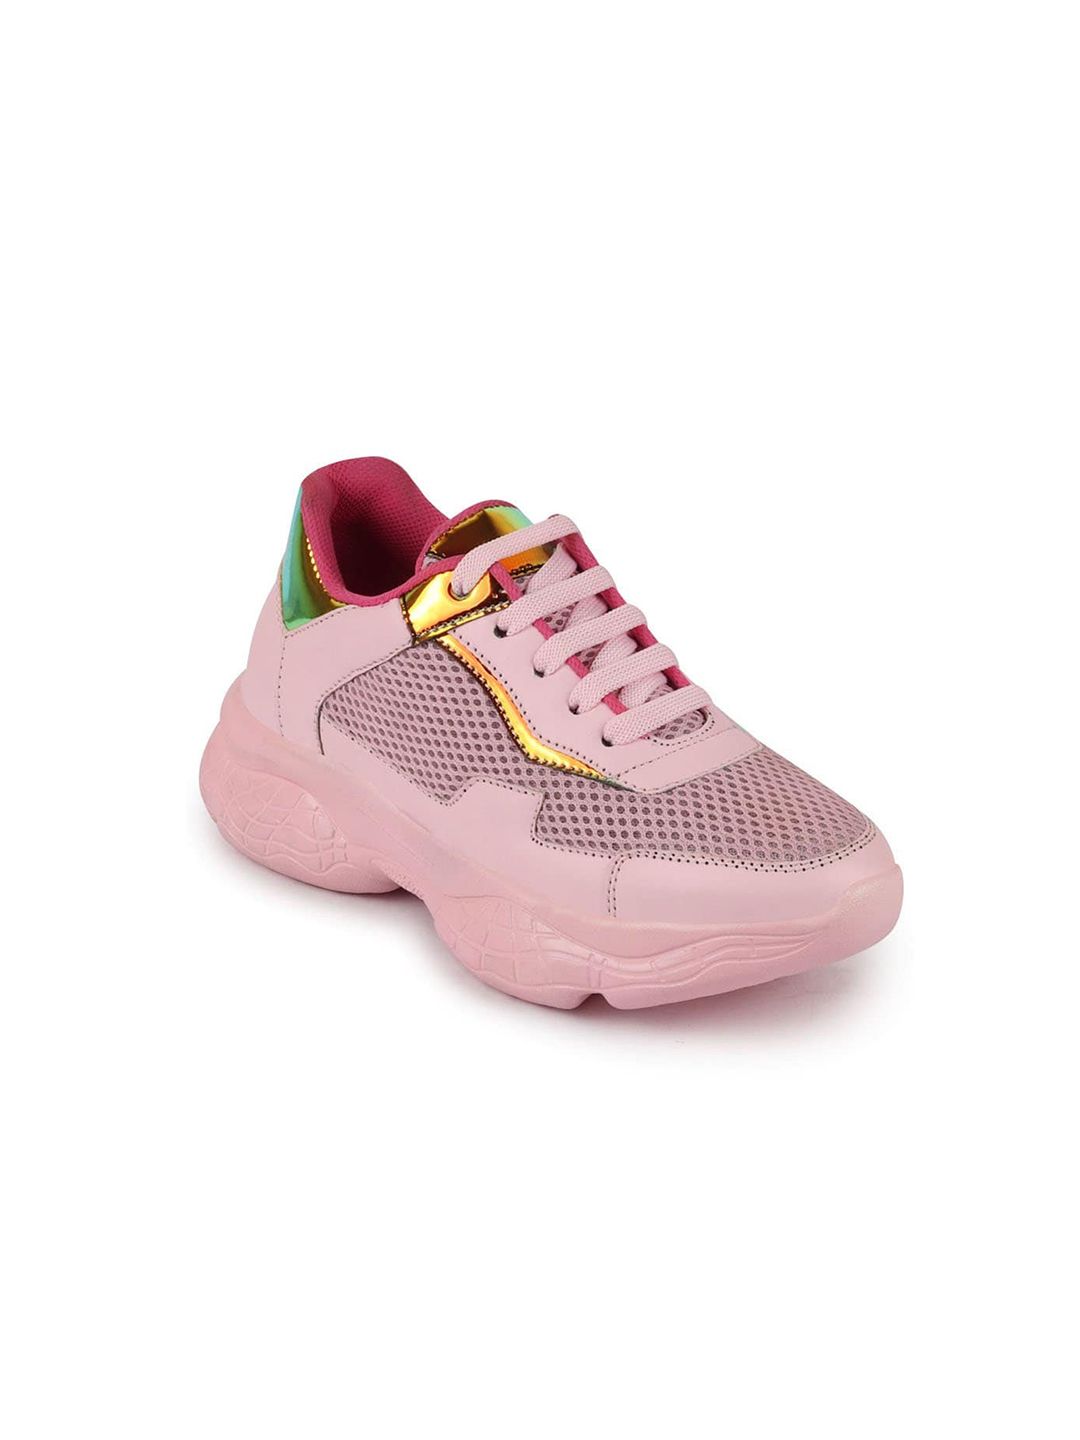 FAUSTO Women Pink Running Non-Marking Shoes Price in India